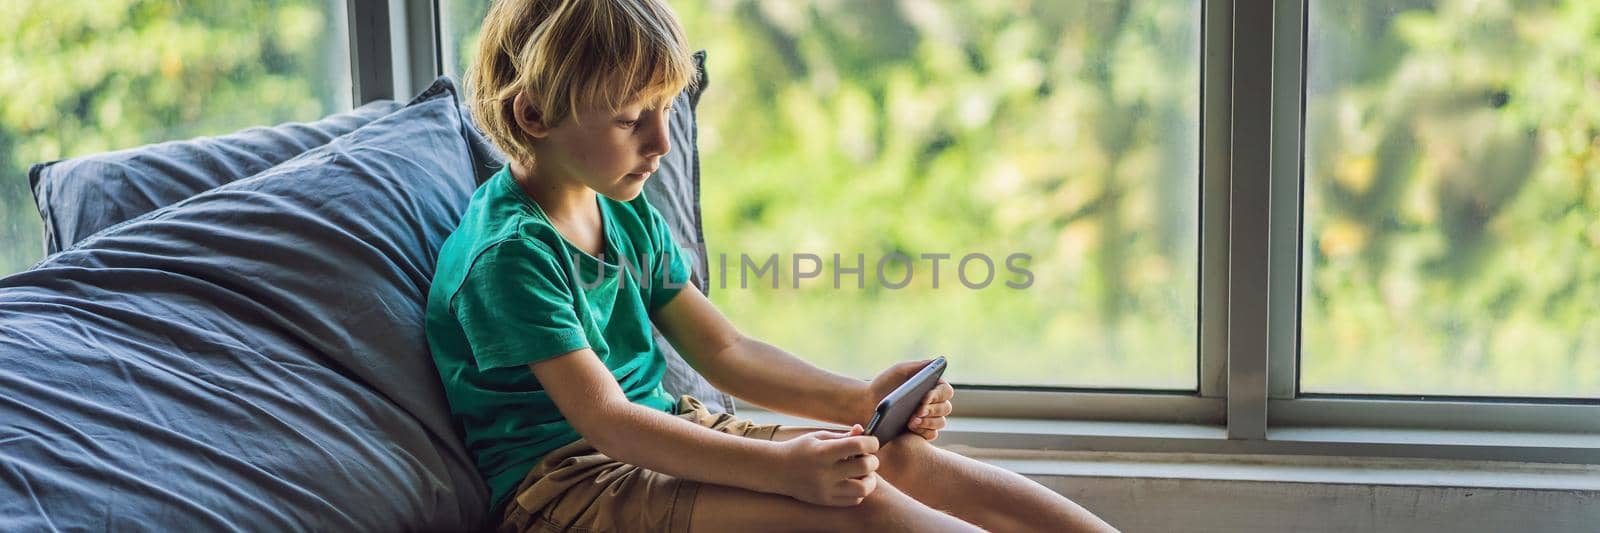 Little blond boy playing games on smartphone. BANNER, LONG FORMAT